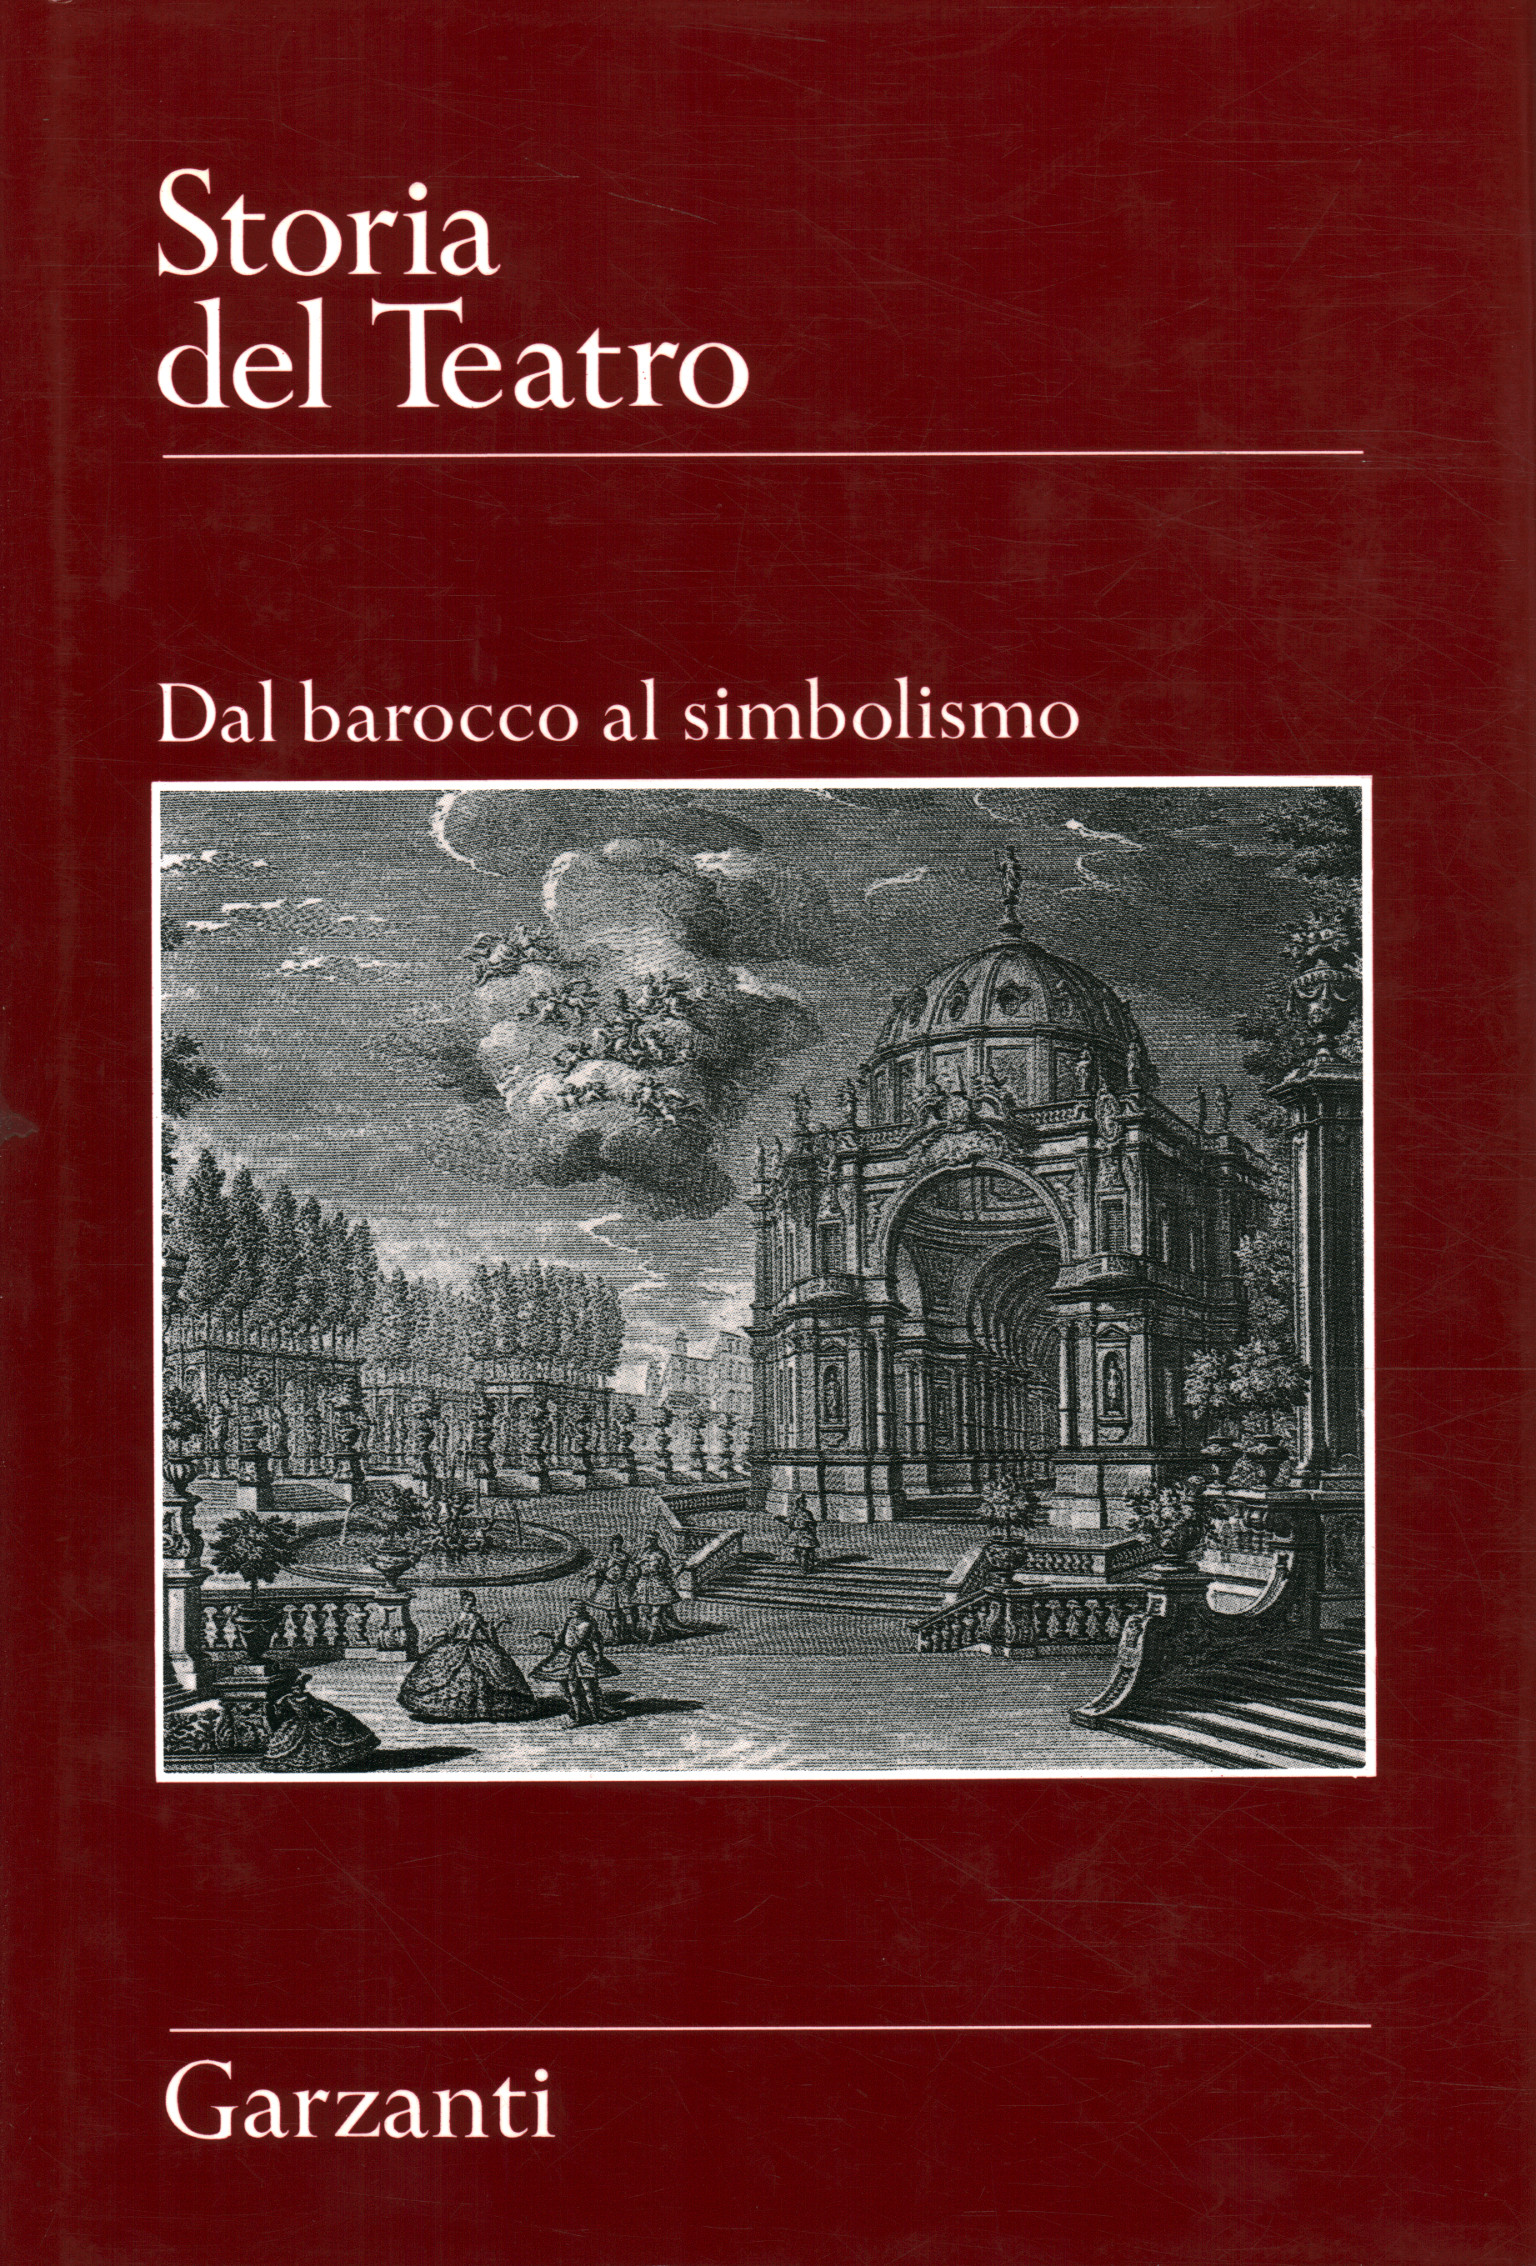 History of the Theater. From the baroque to the simb